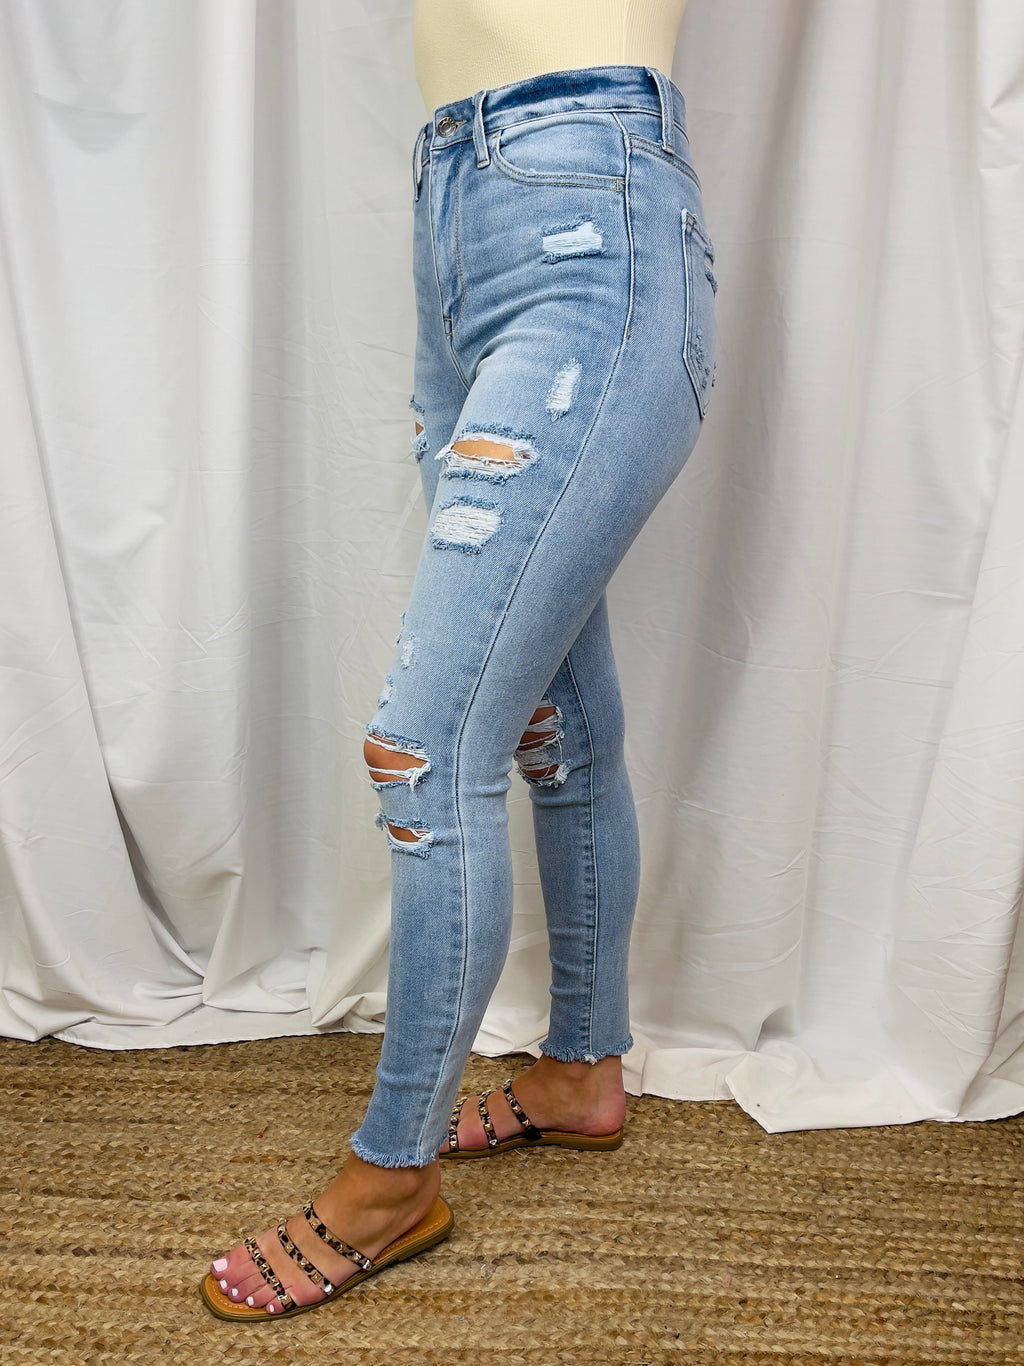 Jeans feature a light denim wash, high rise waist, functional pockets, front distressing detail, frayed ankle, skinny leg fit and runs true to size! 